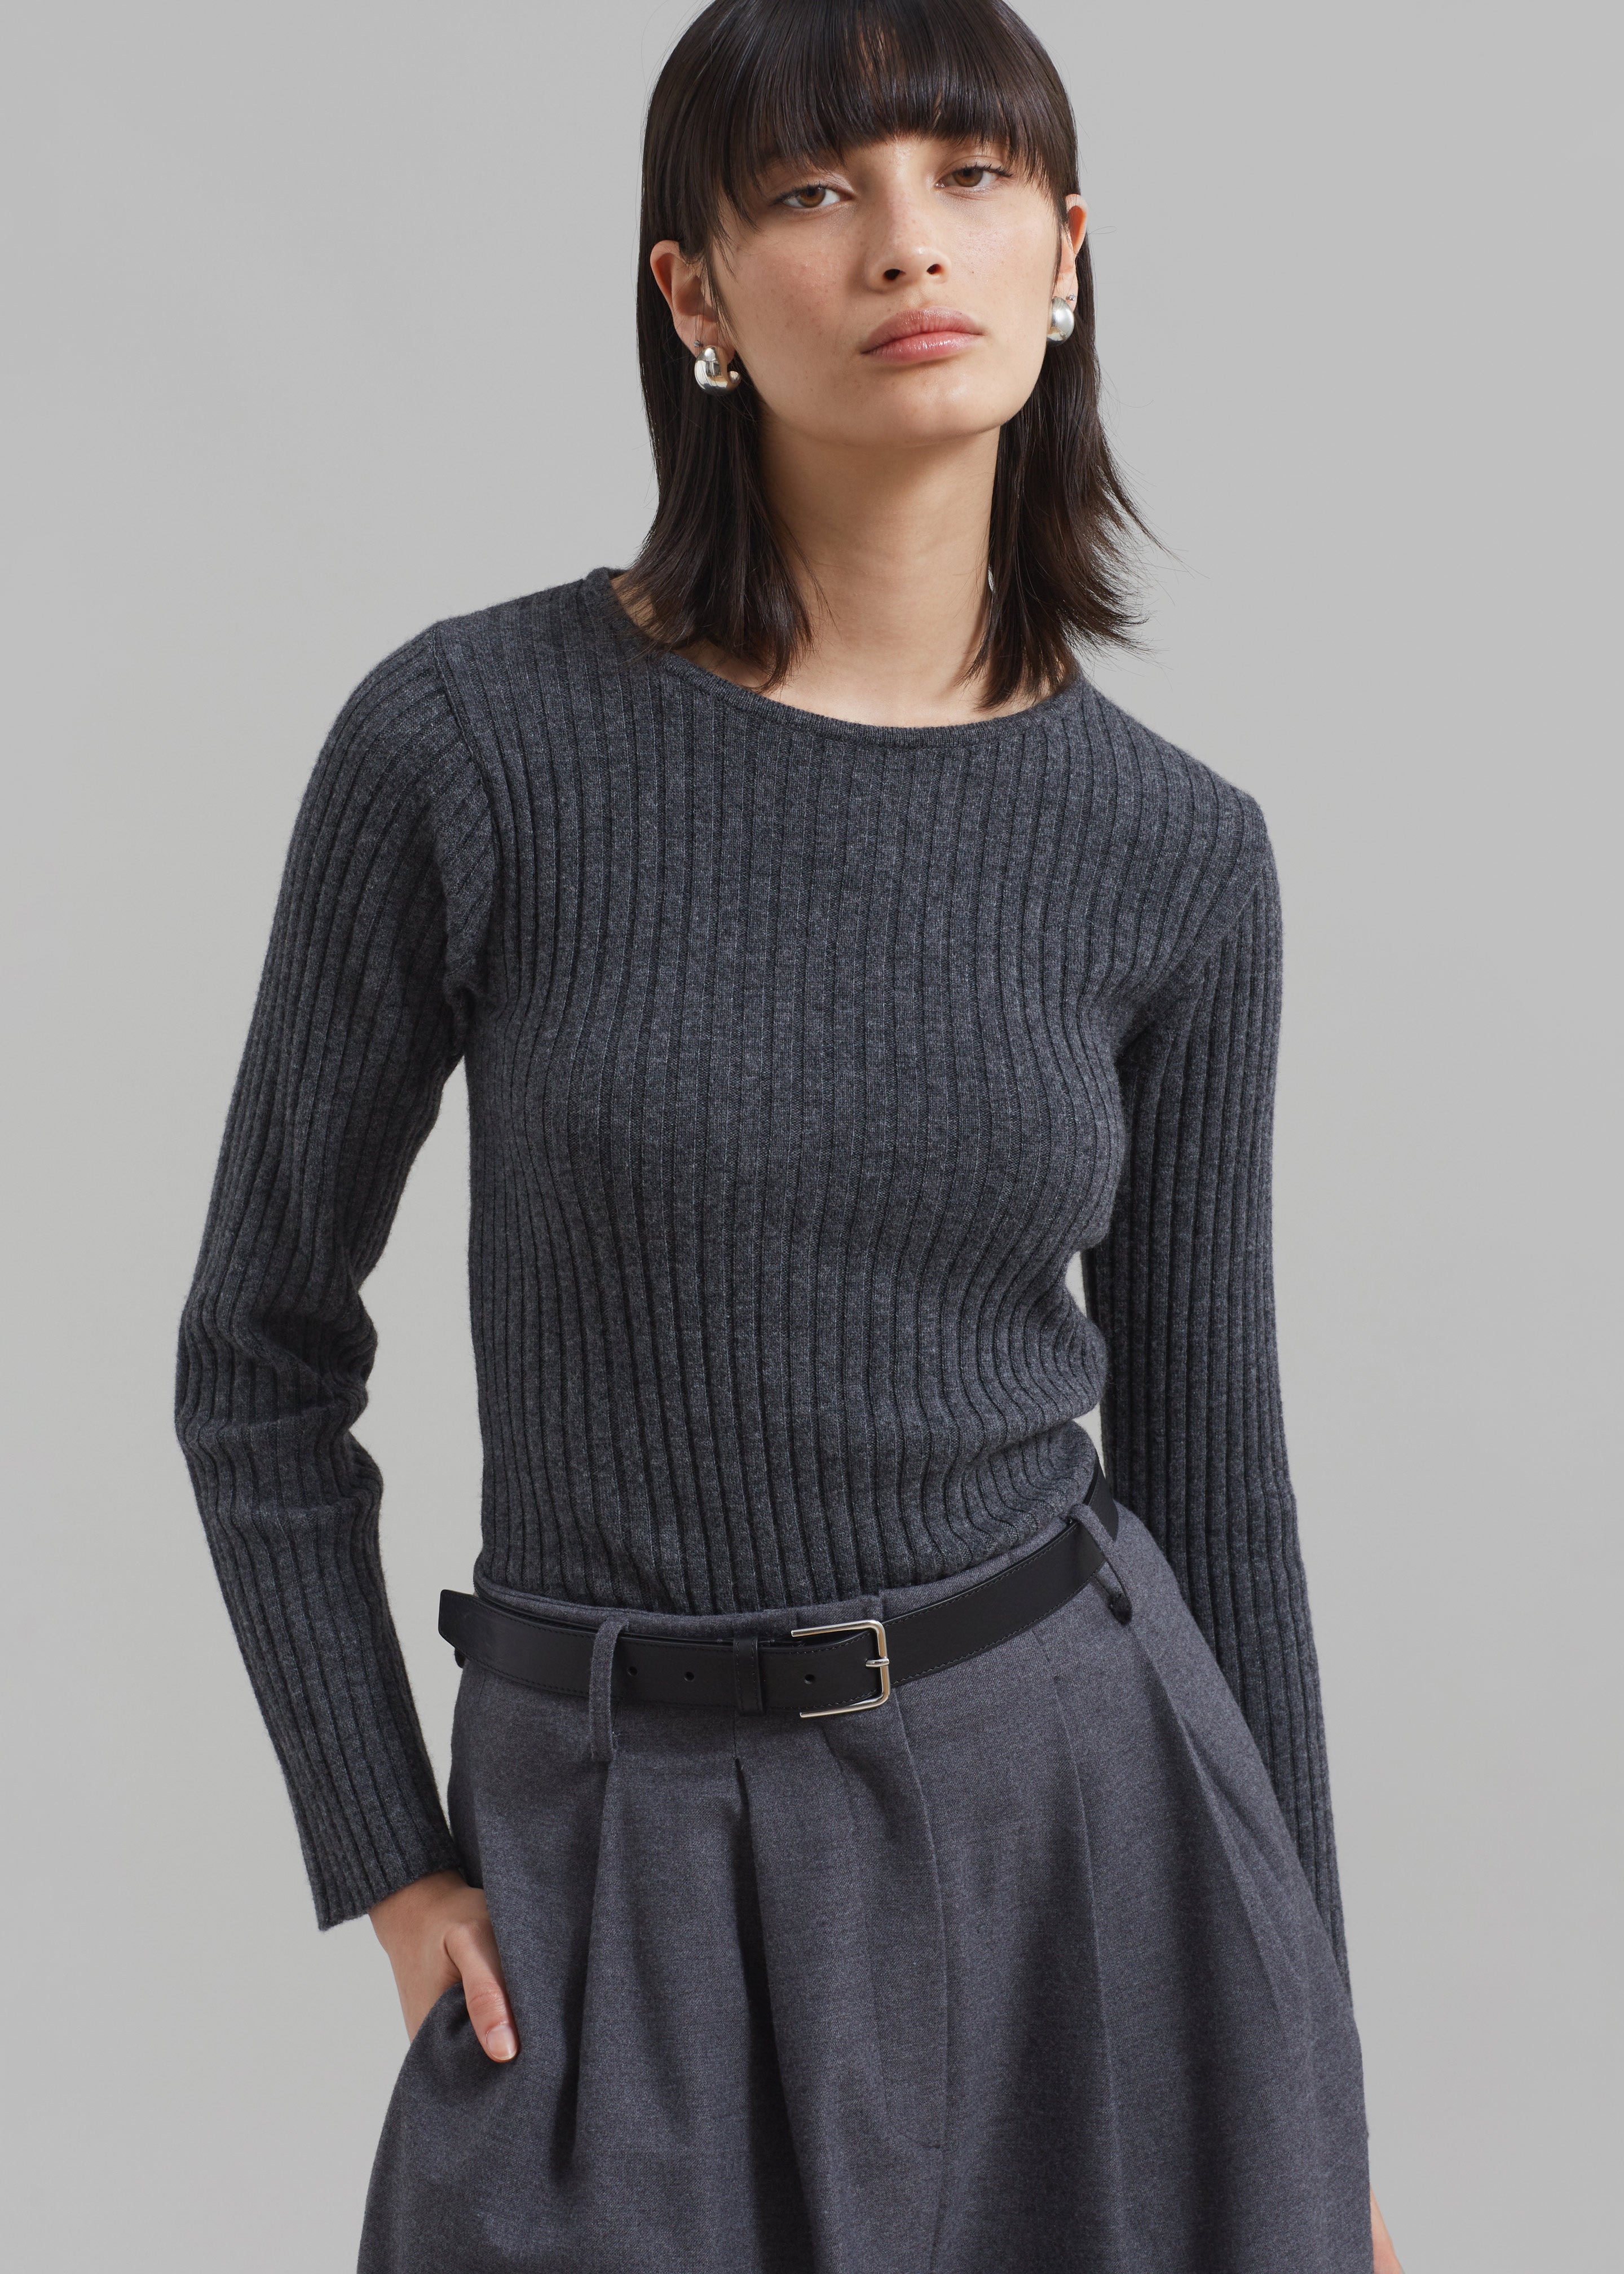 Cora Ribbed Sweater - Charcoal - 1